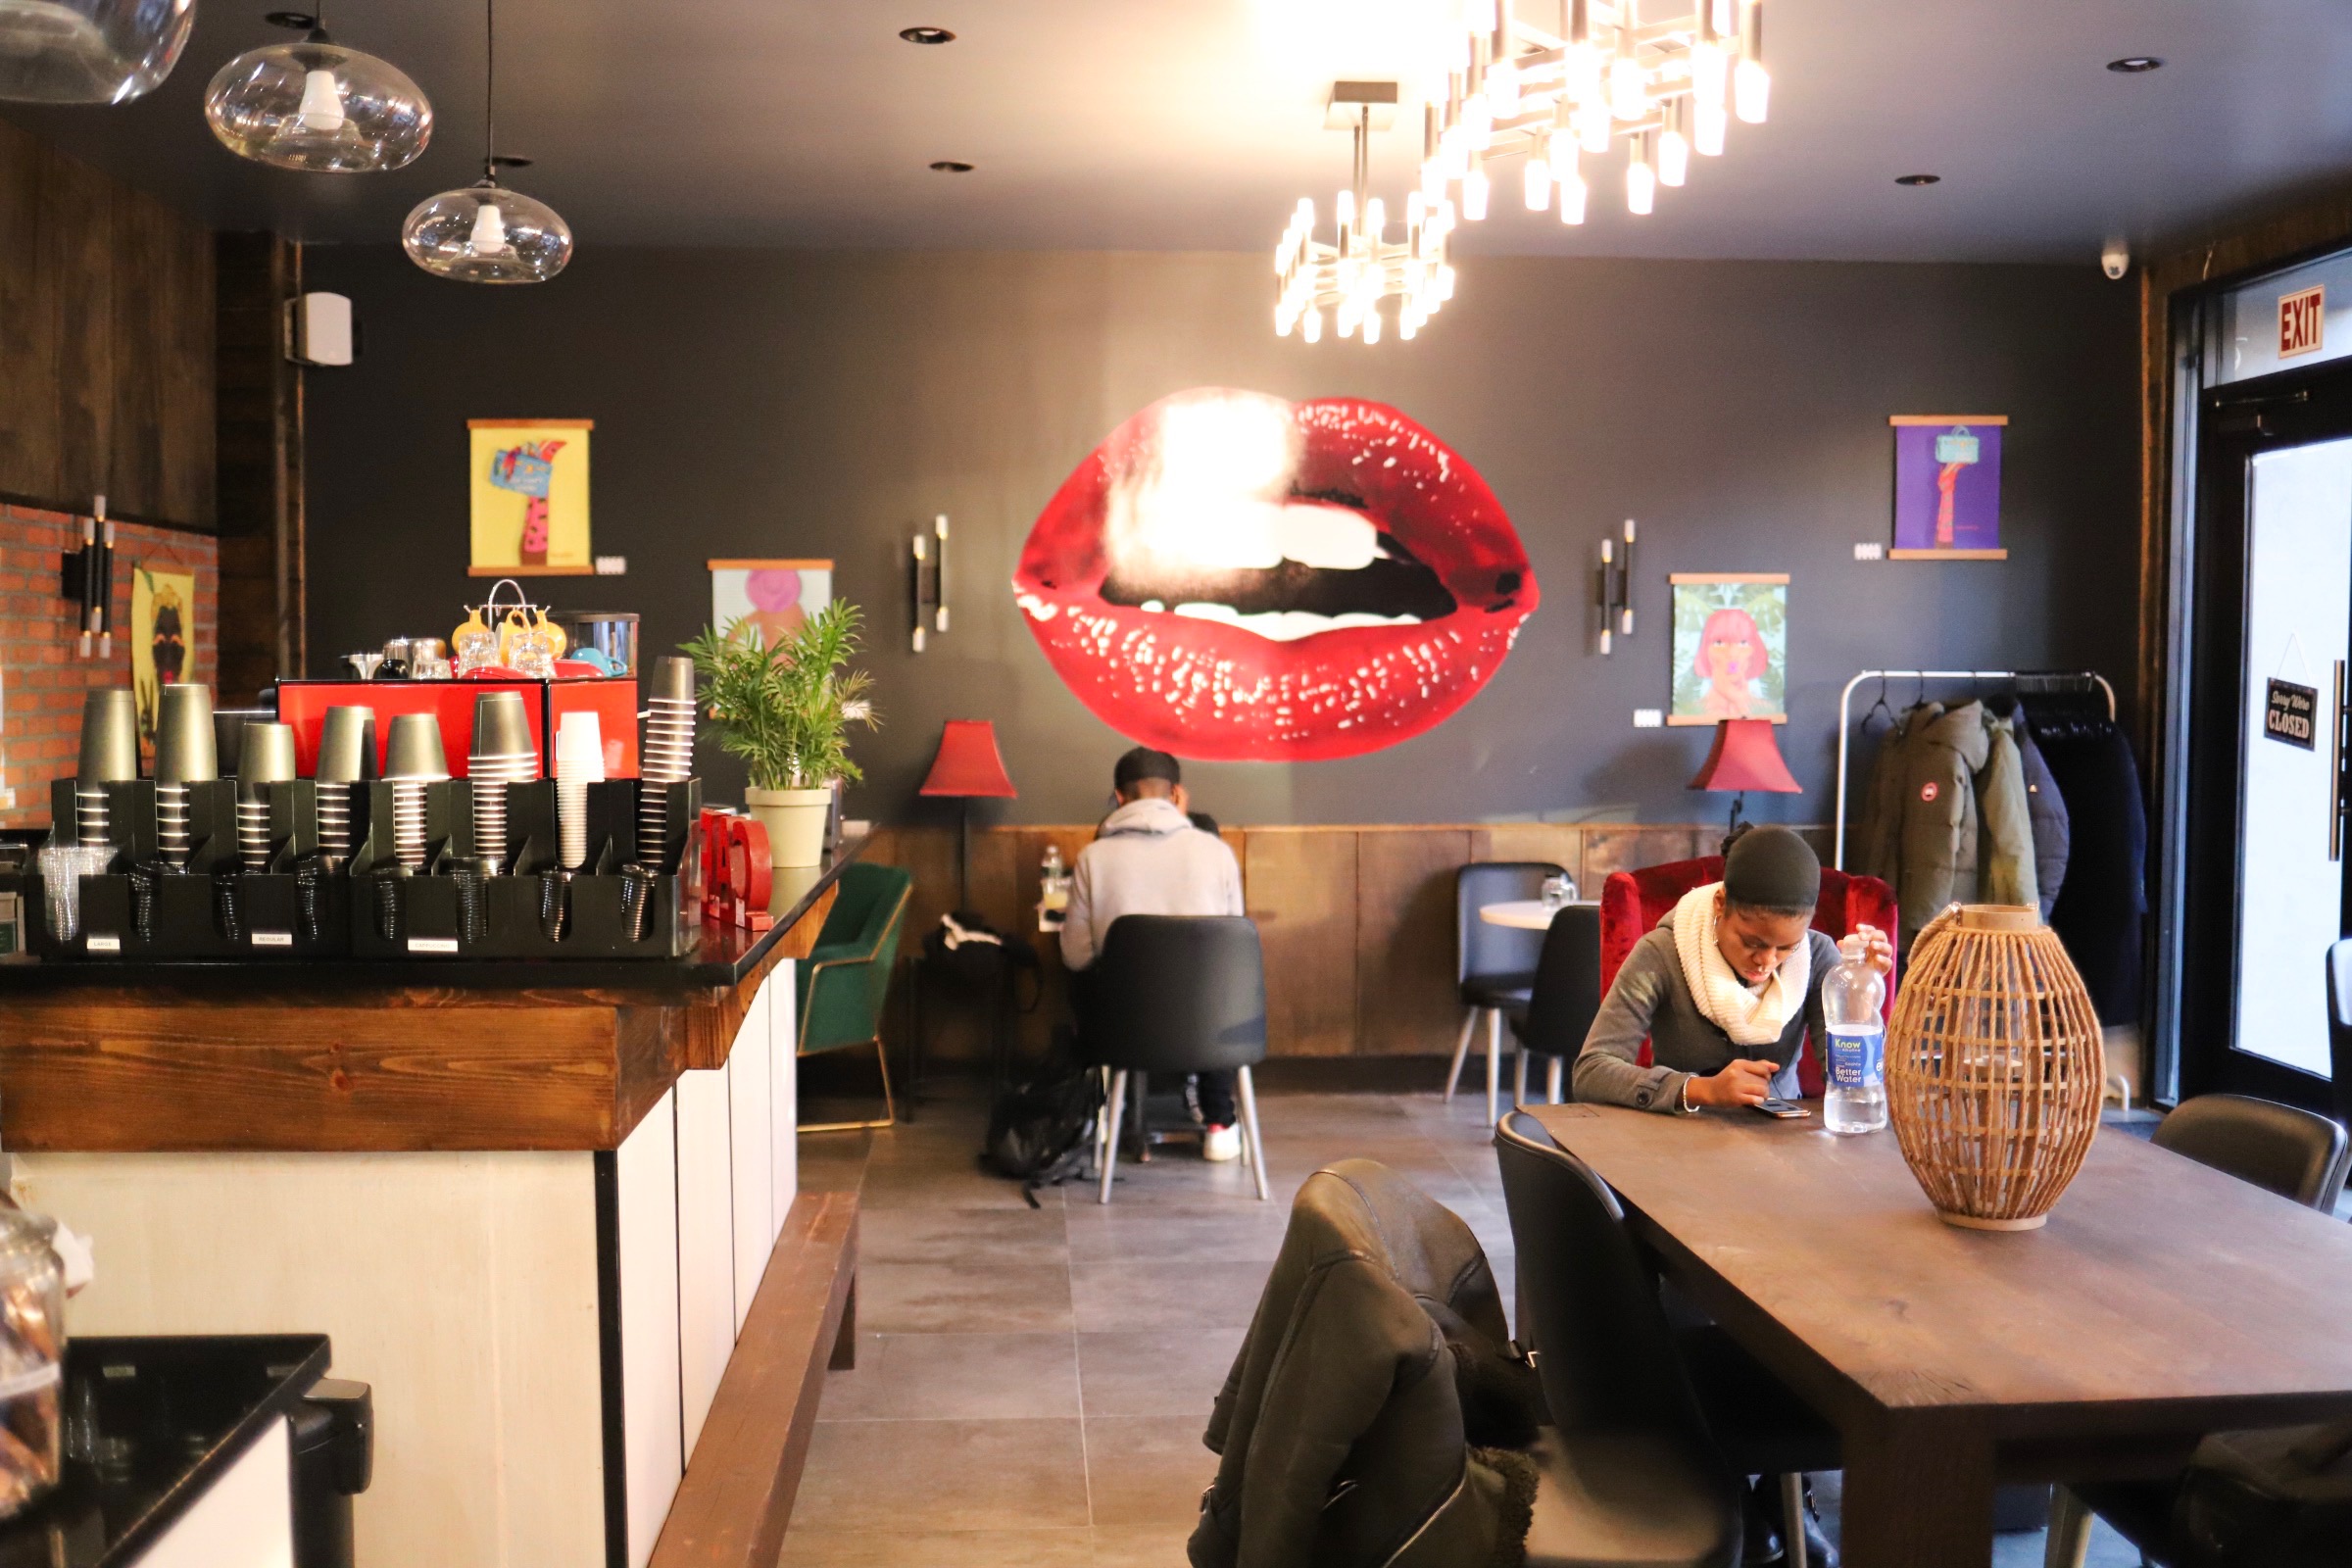 Indulge In The Cafe Experience With Caribbean Flare At Brooklyn’s Lips Cafe